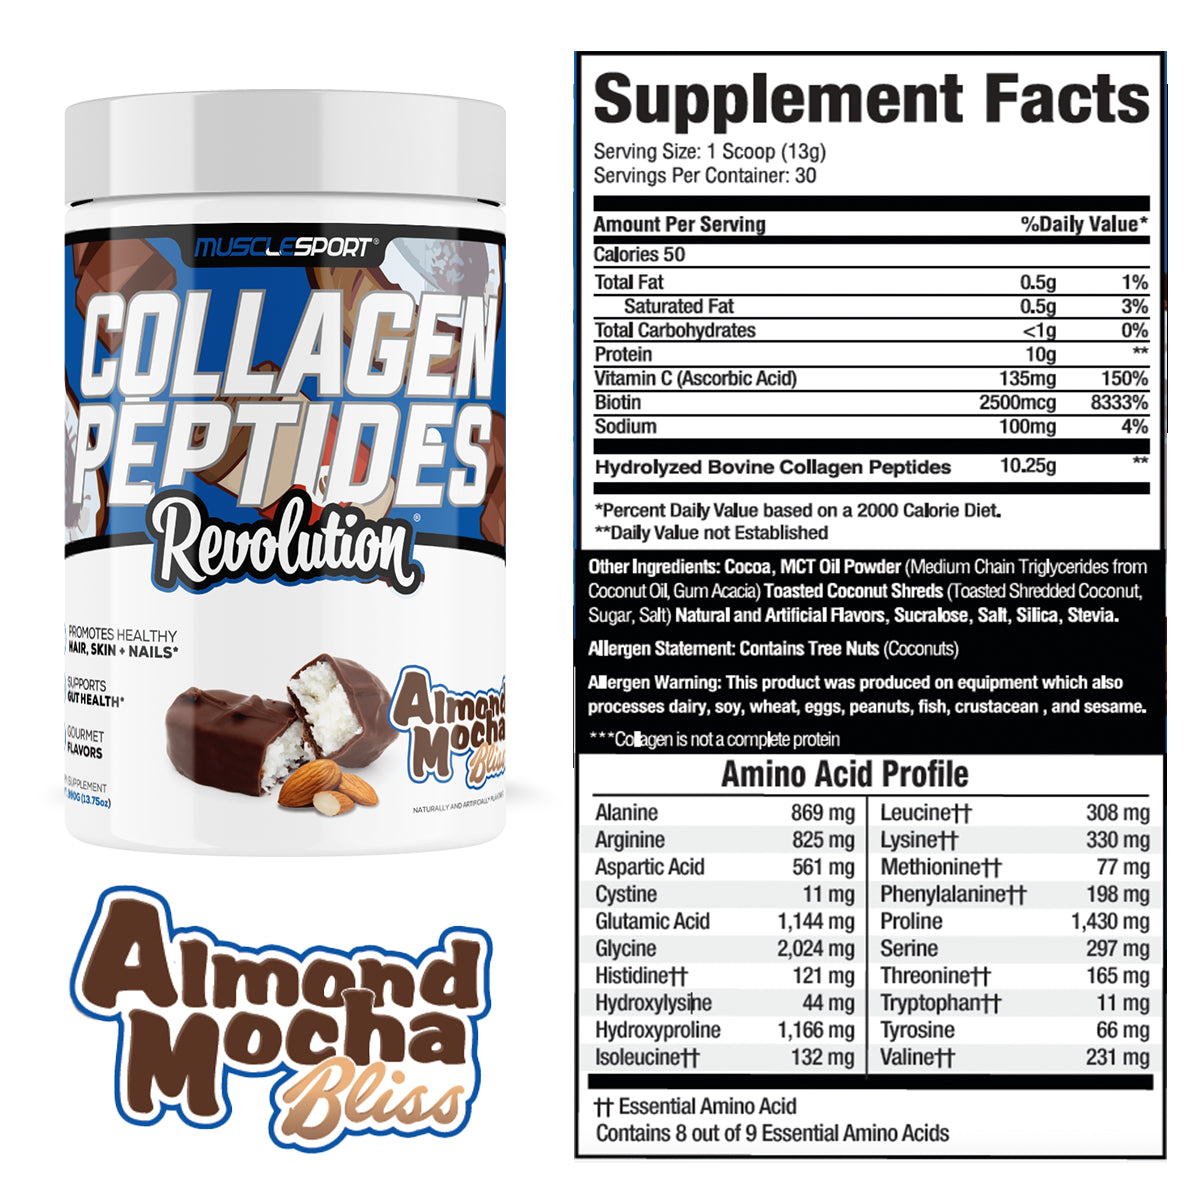 Collagen Peptides Almond Mocha Bliss Supplement Facts